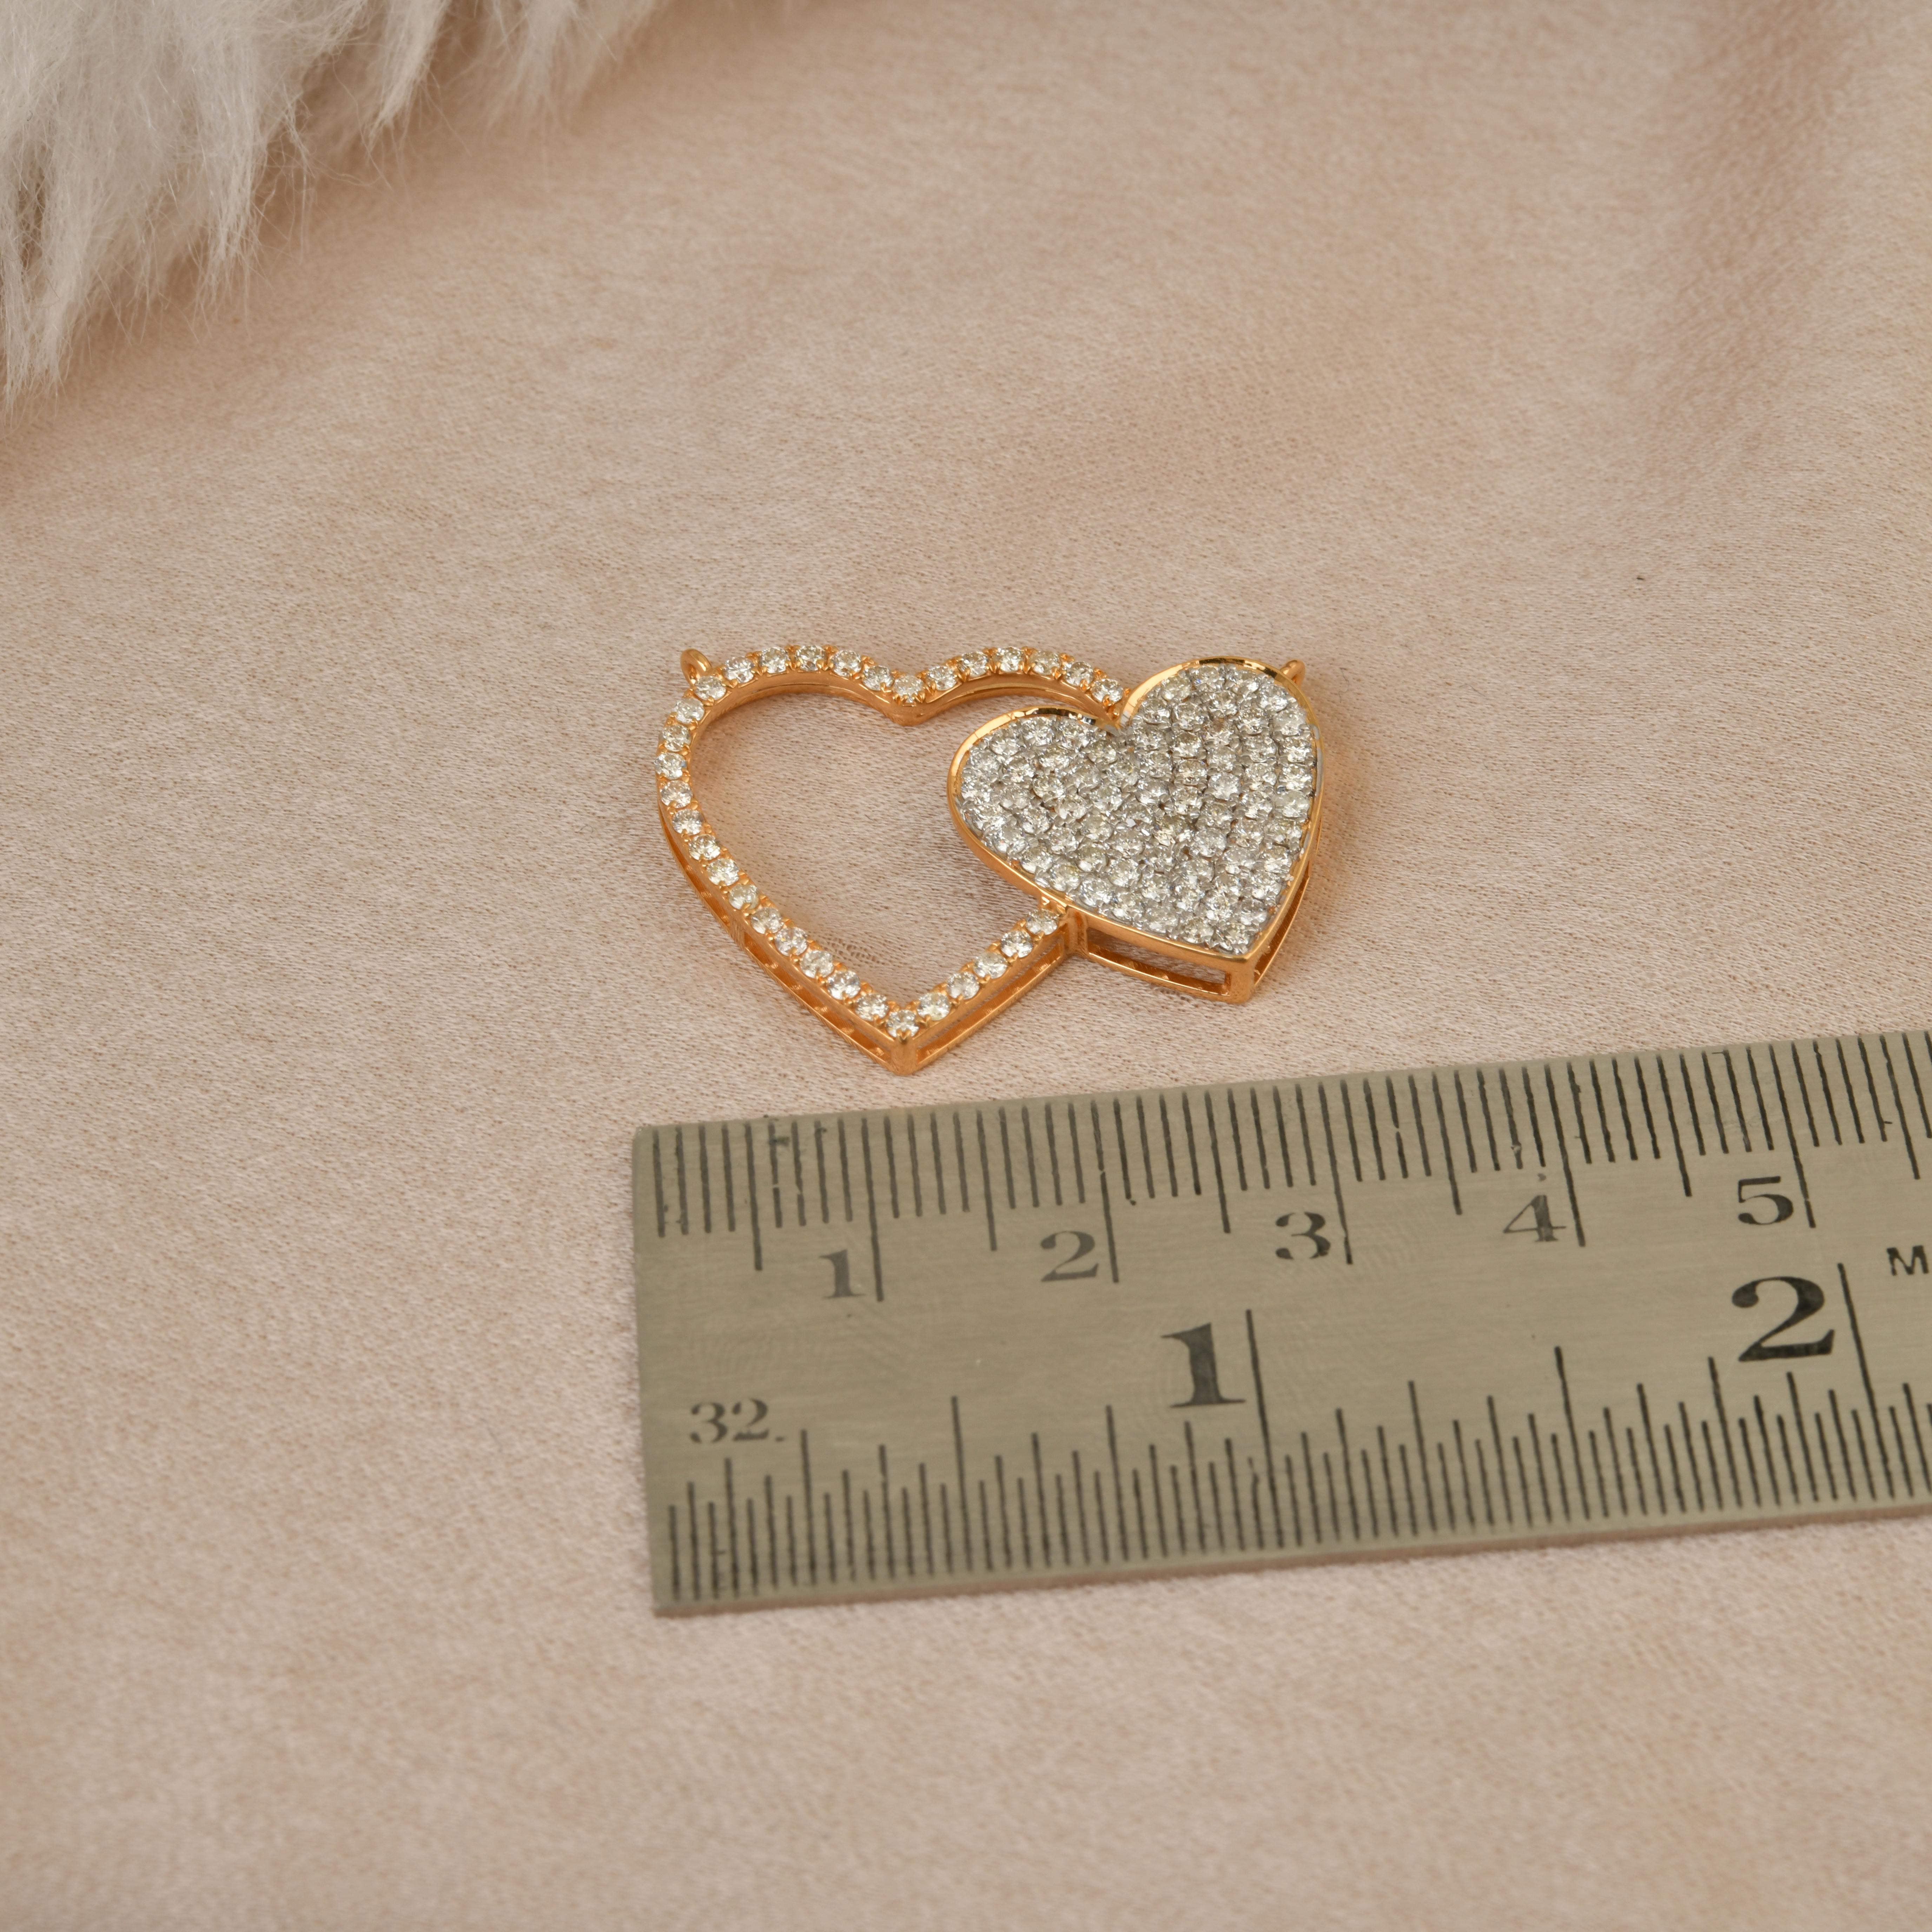 Round Cut 1.50 Carat Diamond Pave Double Heart Charm Pendant Solid 18k Yellow Gold Jewelry For Sale